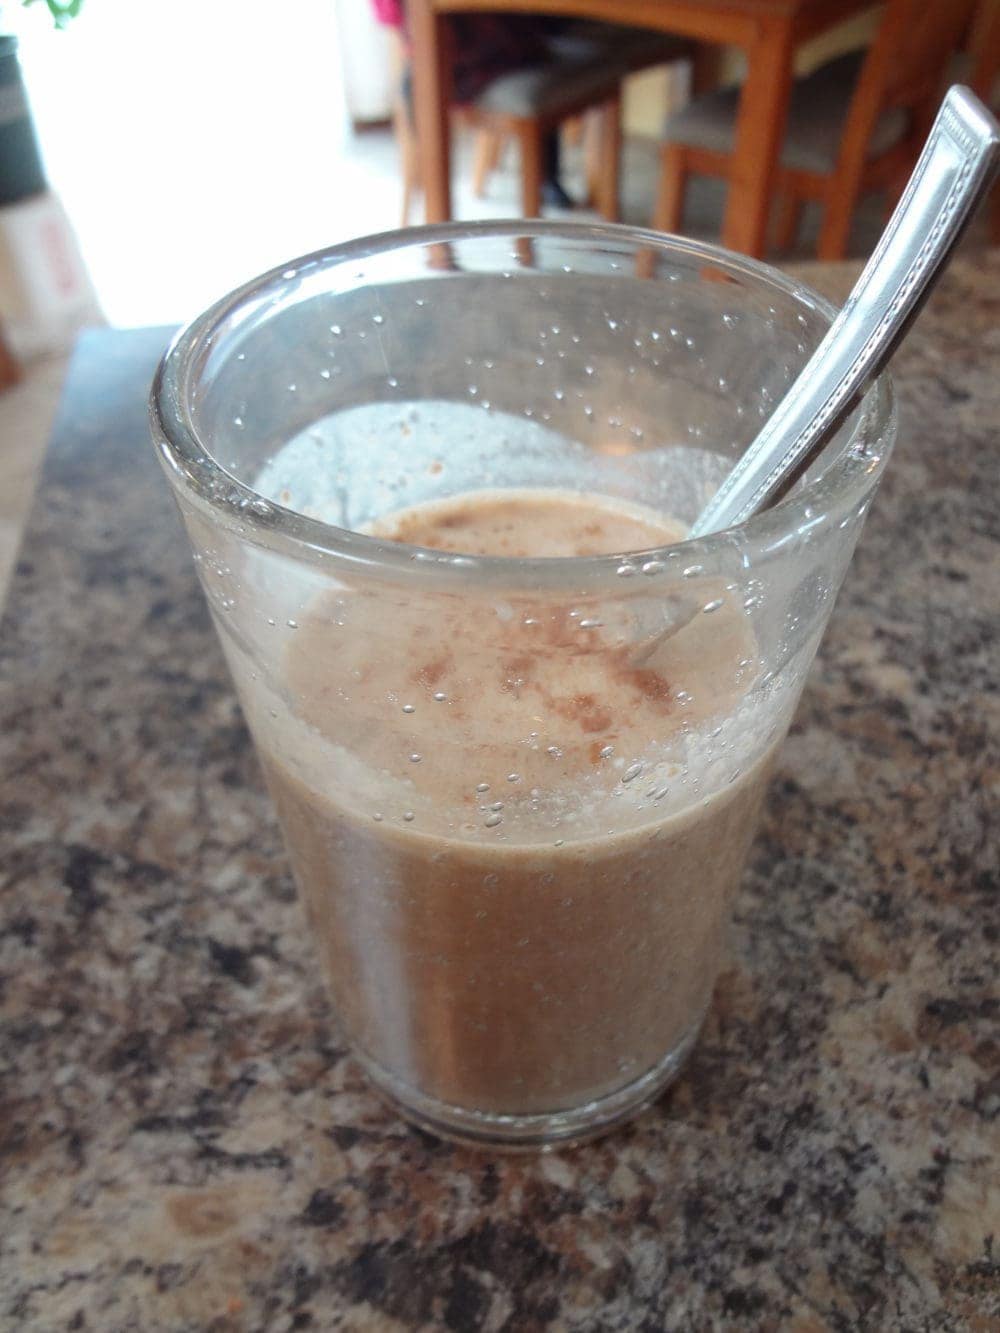 A mocha protein shake served in a glass cup with a spoon.